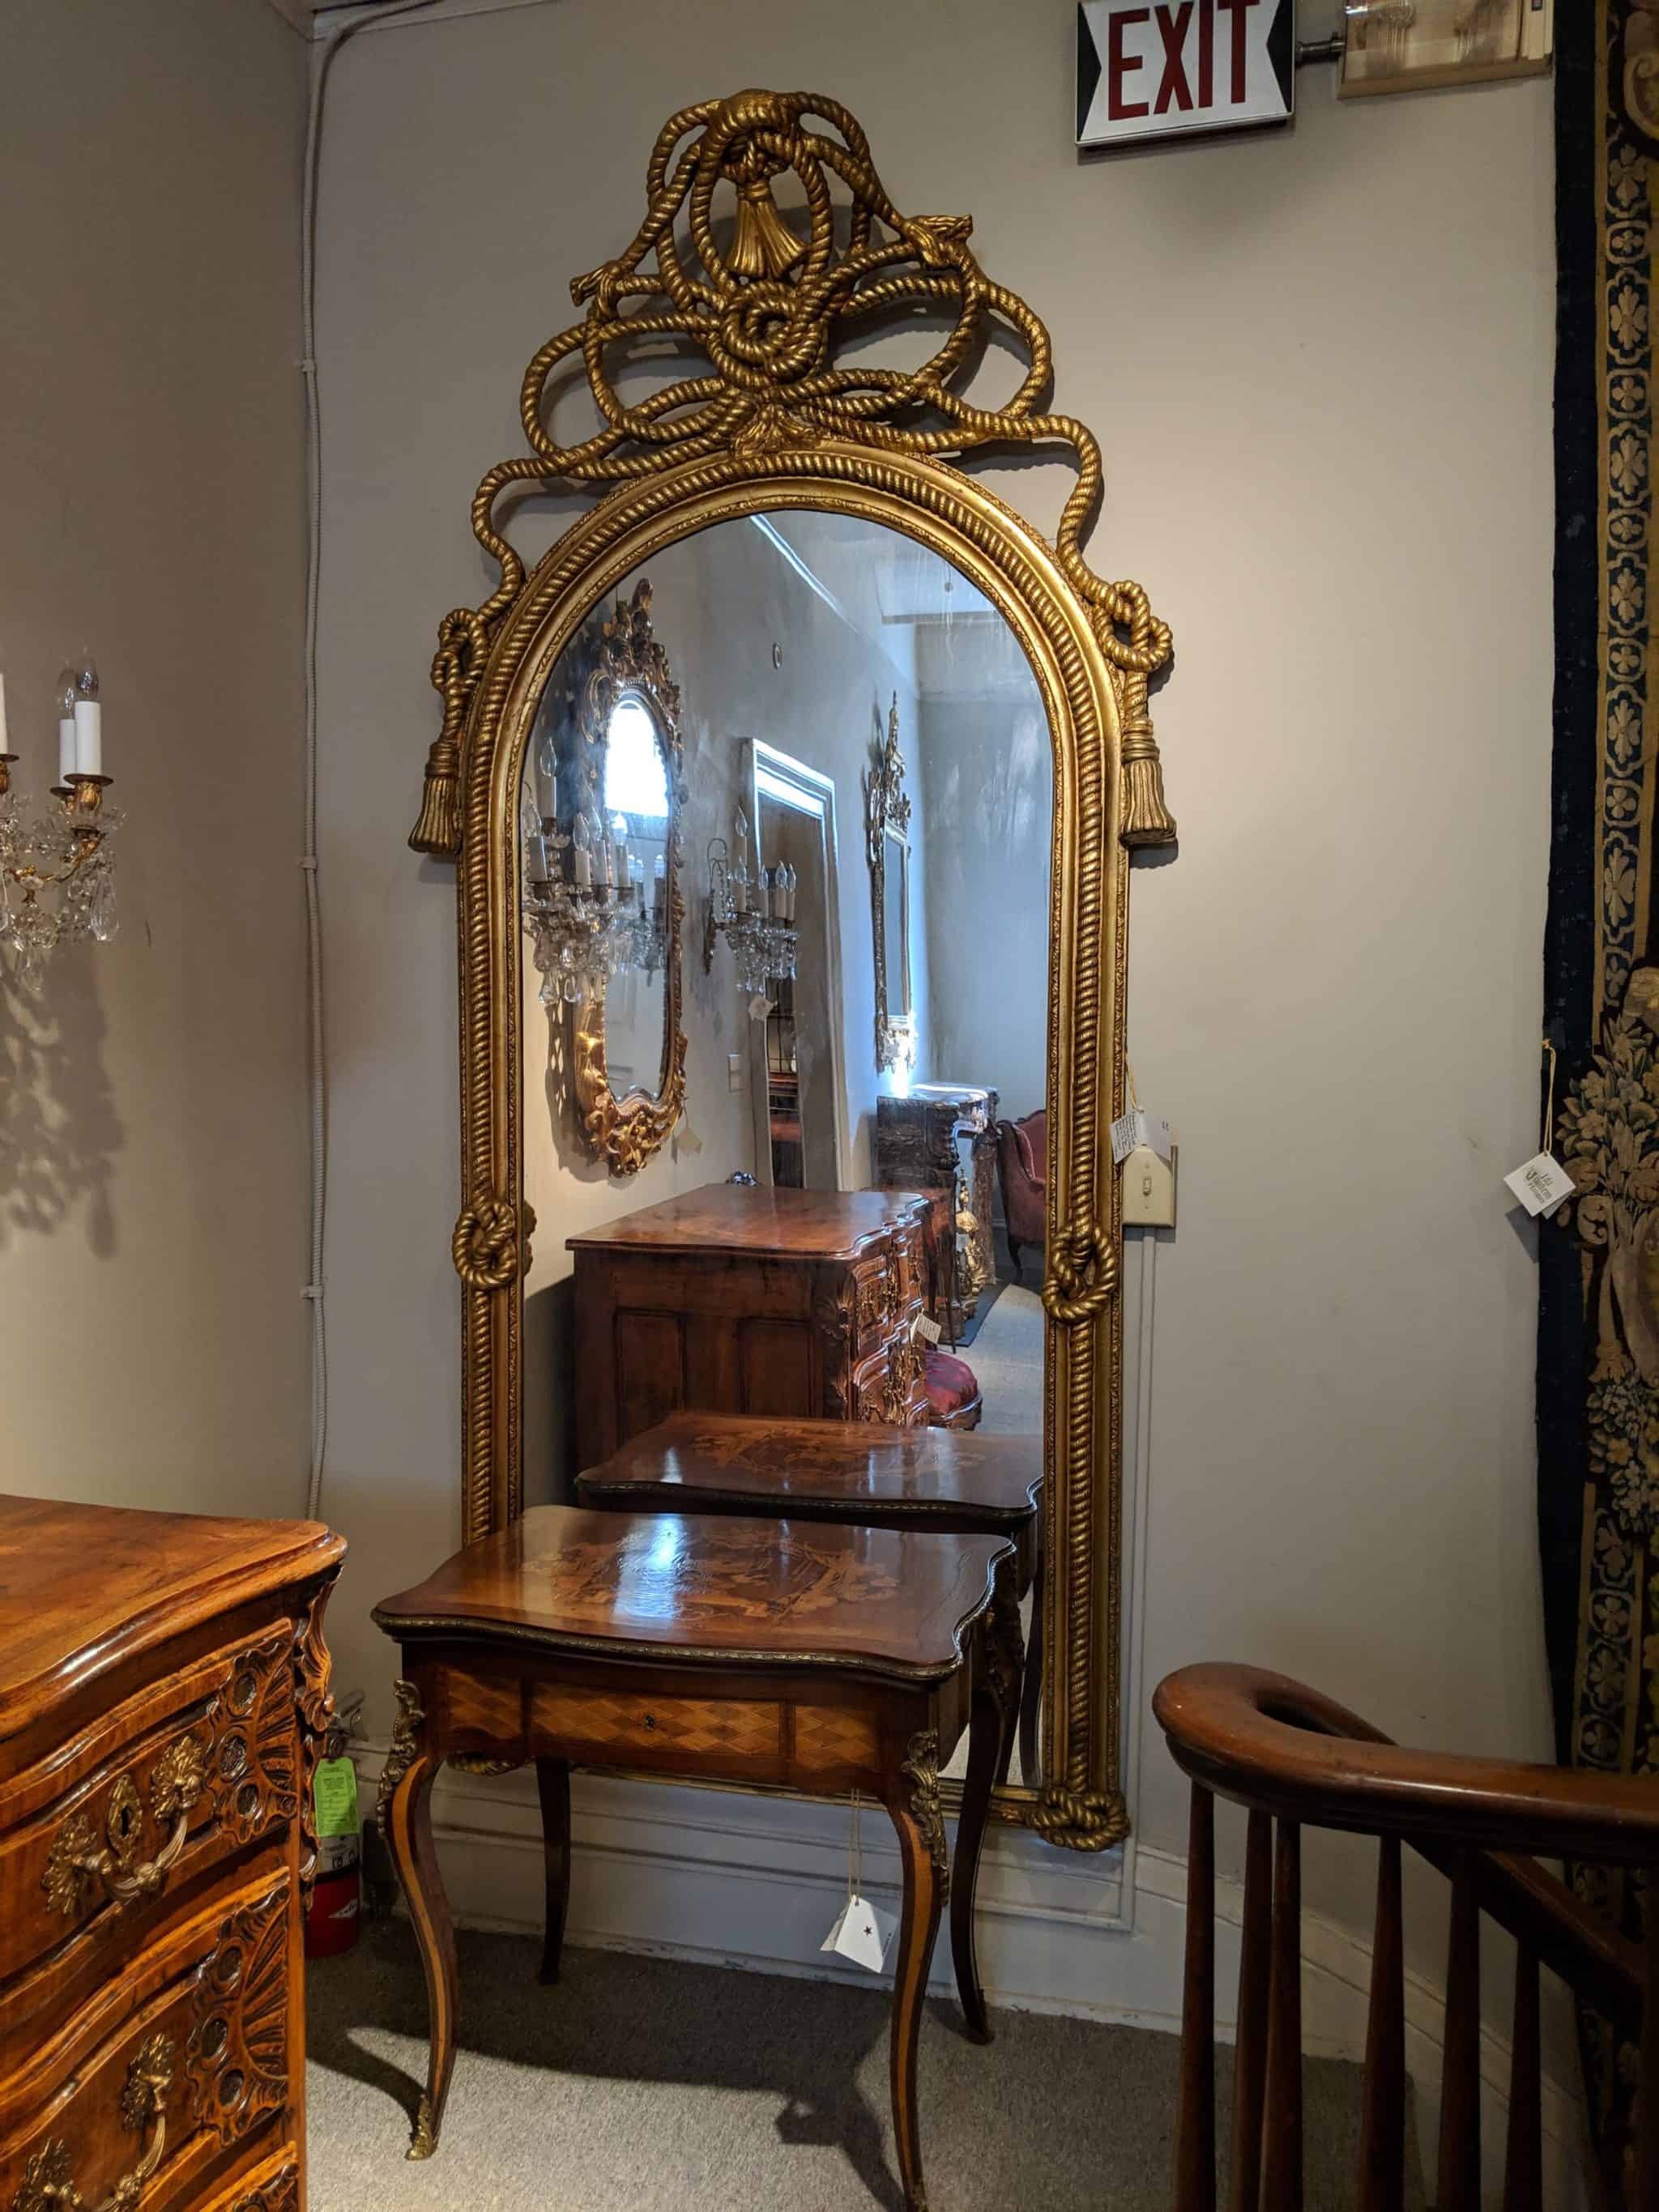 I'll take an antique mirror any day